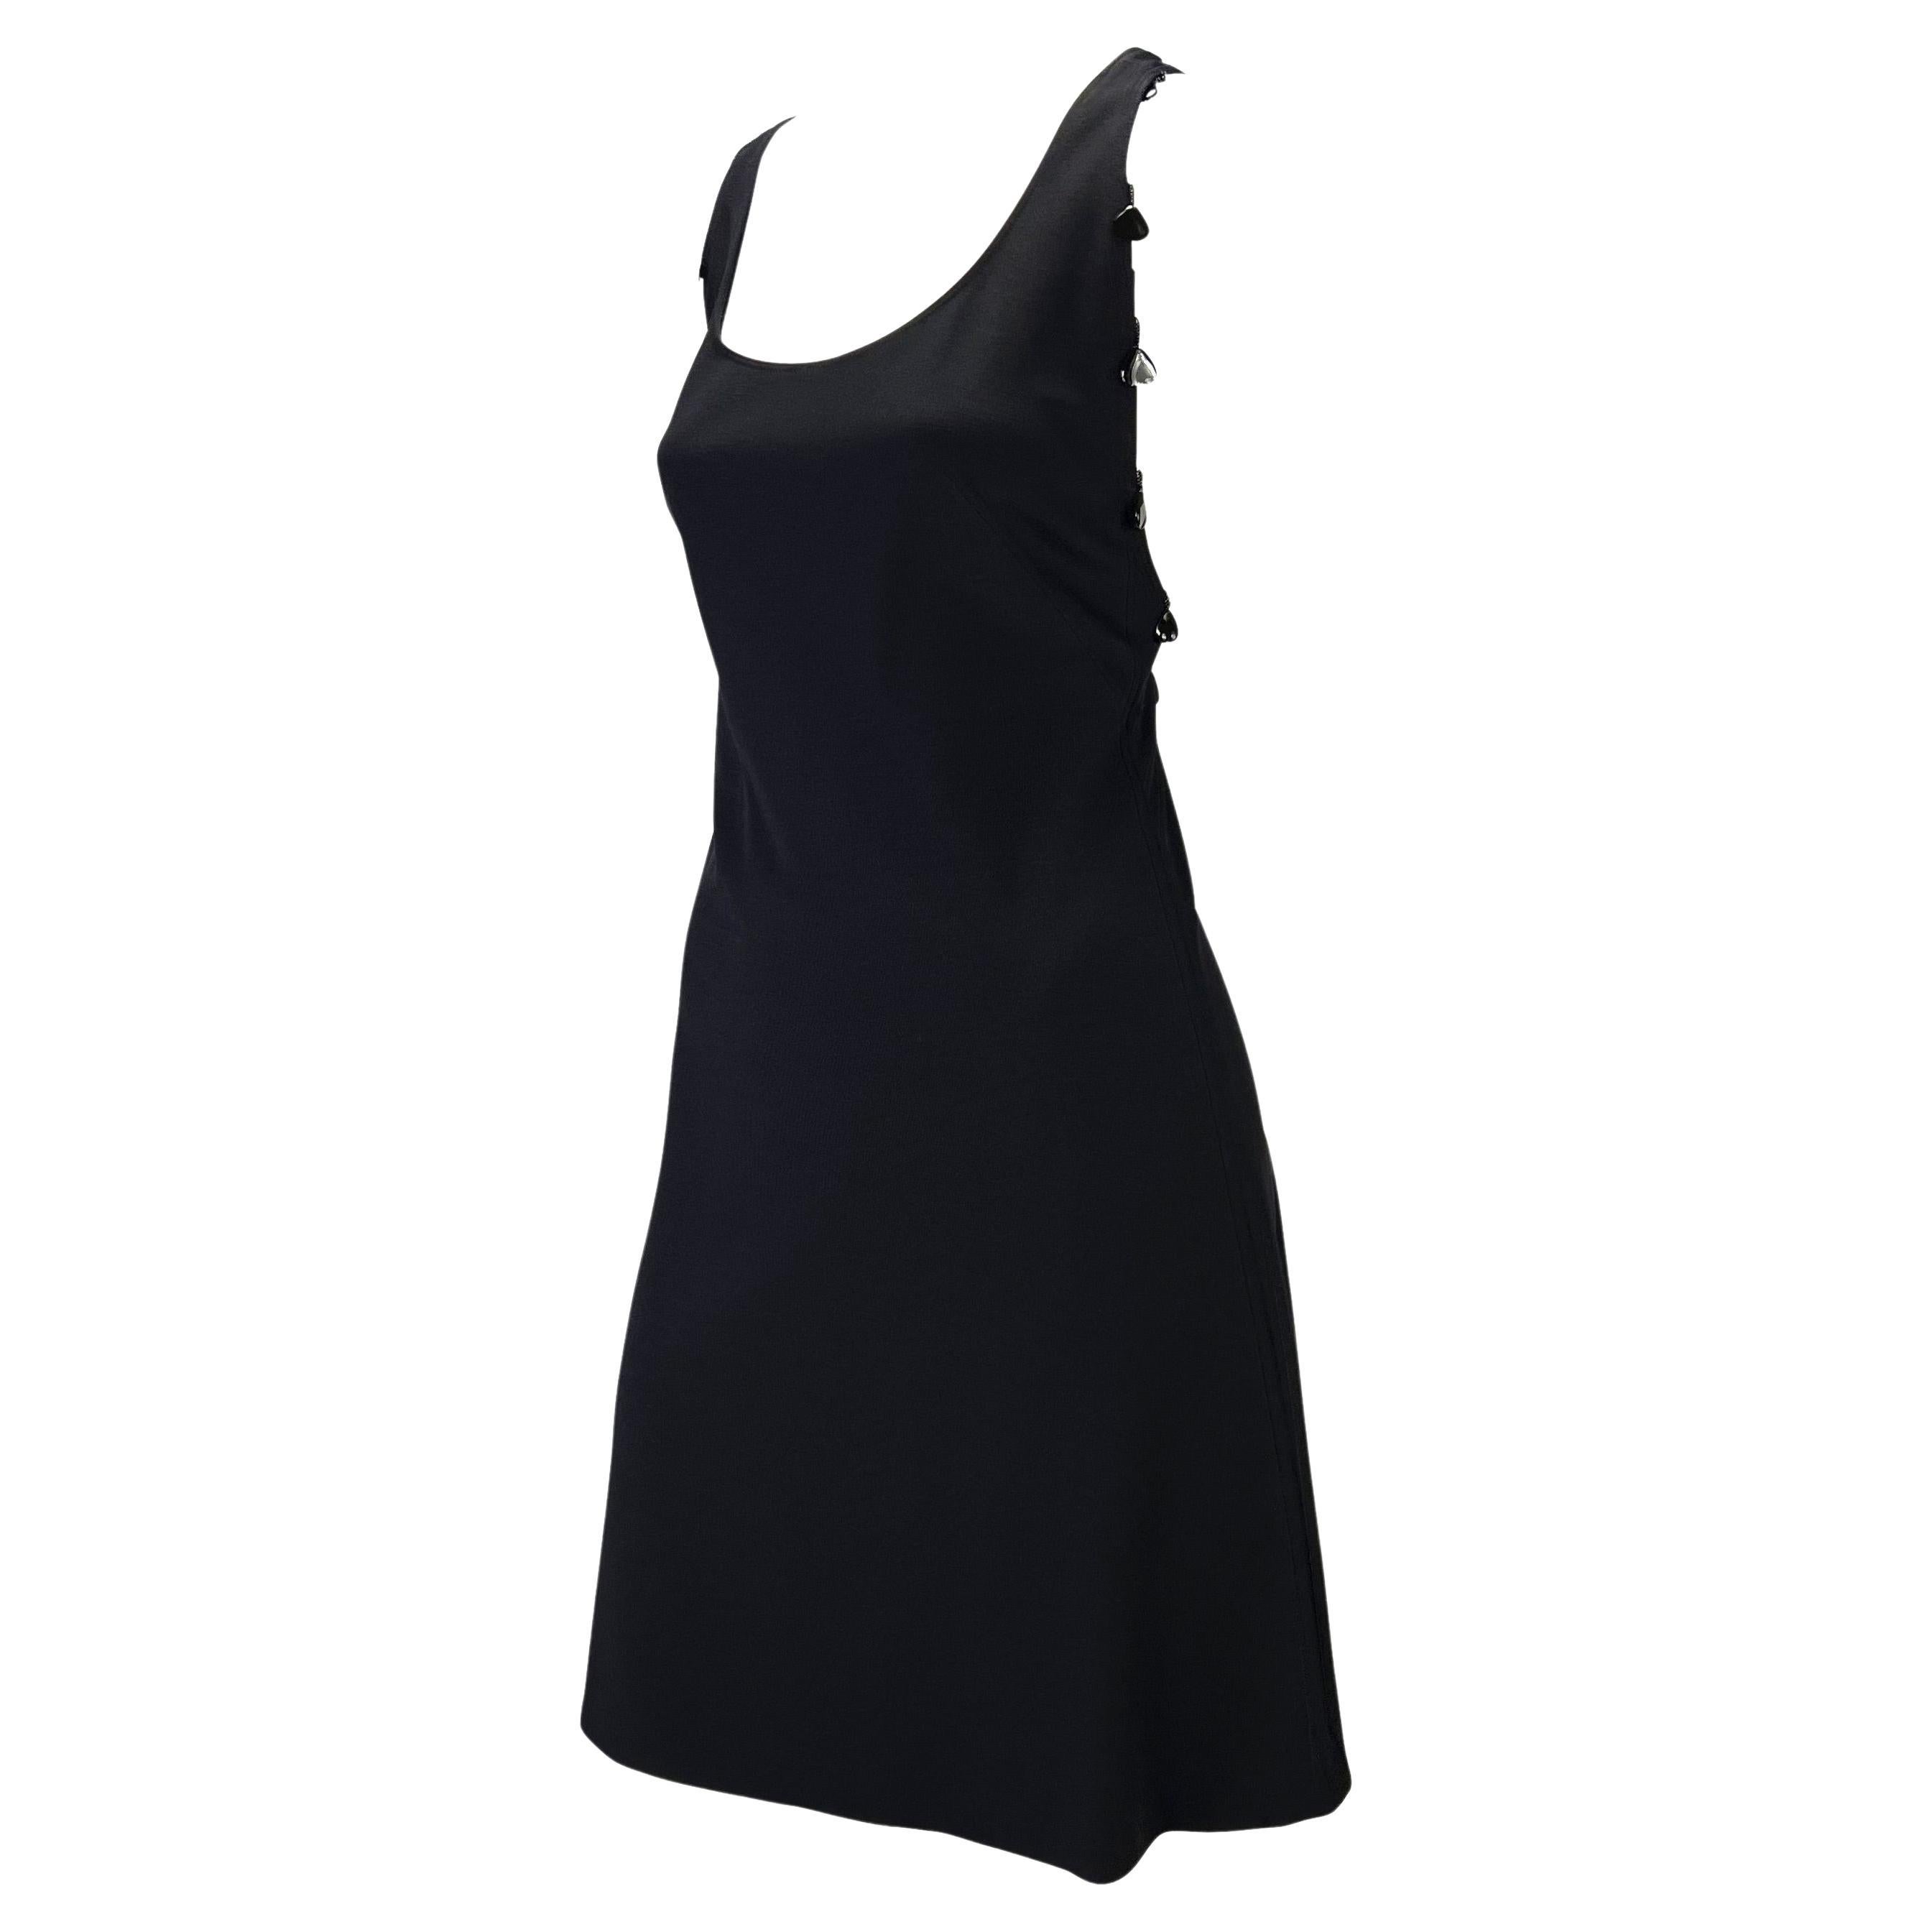 S/S 2004 Chloe by Phoebe Philo Black Beaded Heart Racerback Knit Dress In Excellent Condition For Sale In West Hollywood, CA